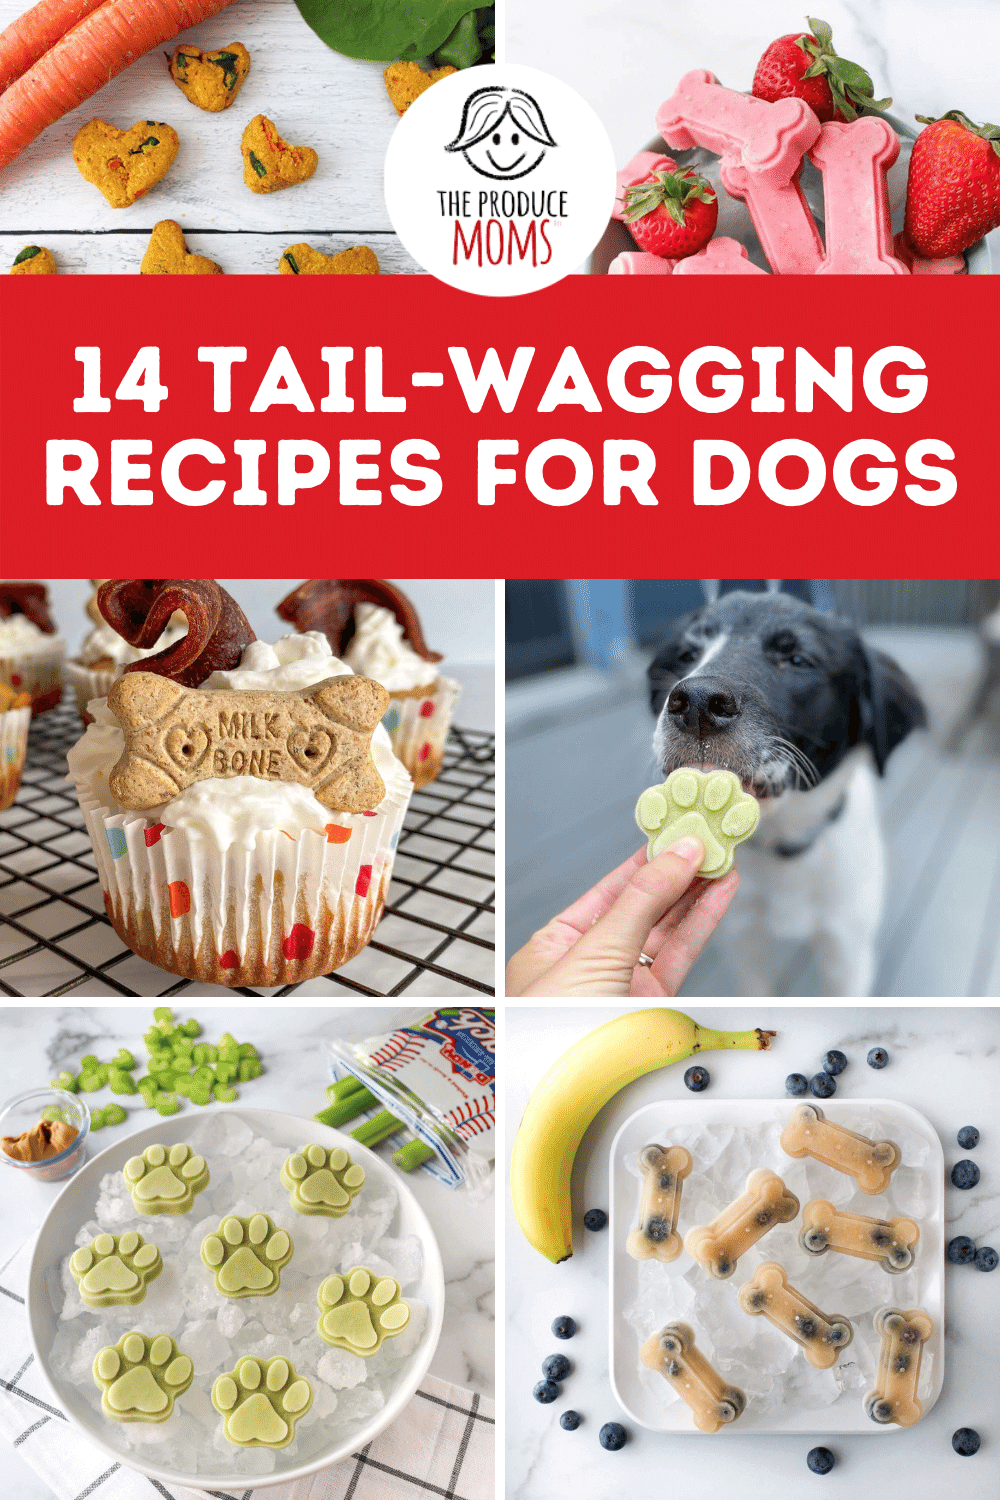 Recipes for Dogs